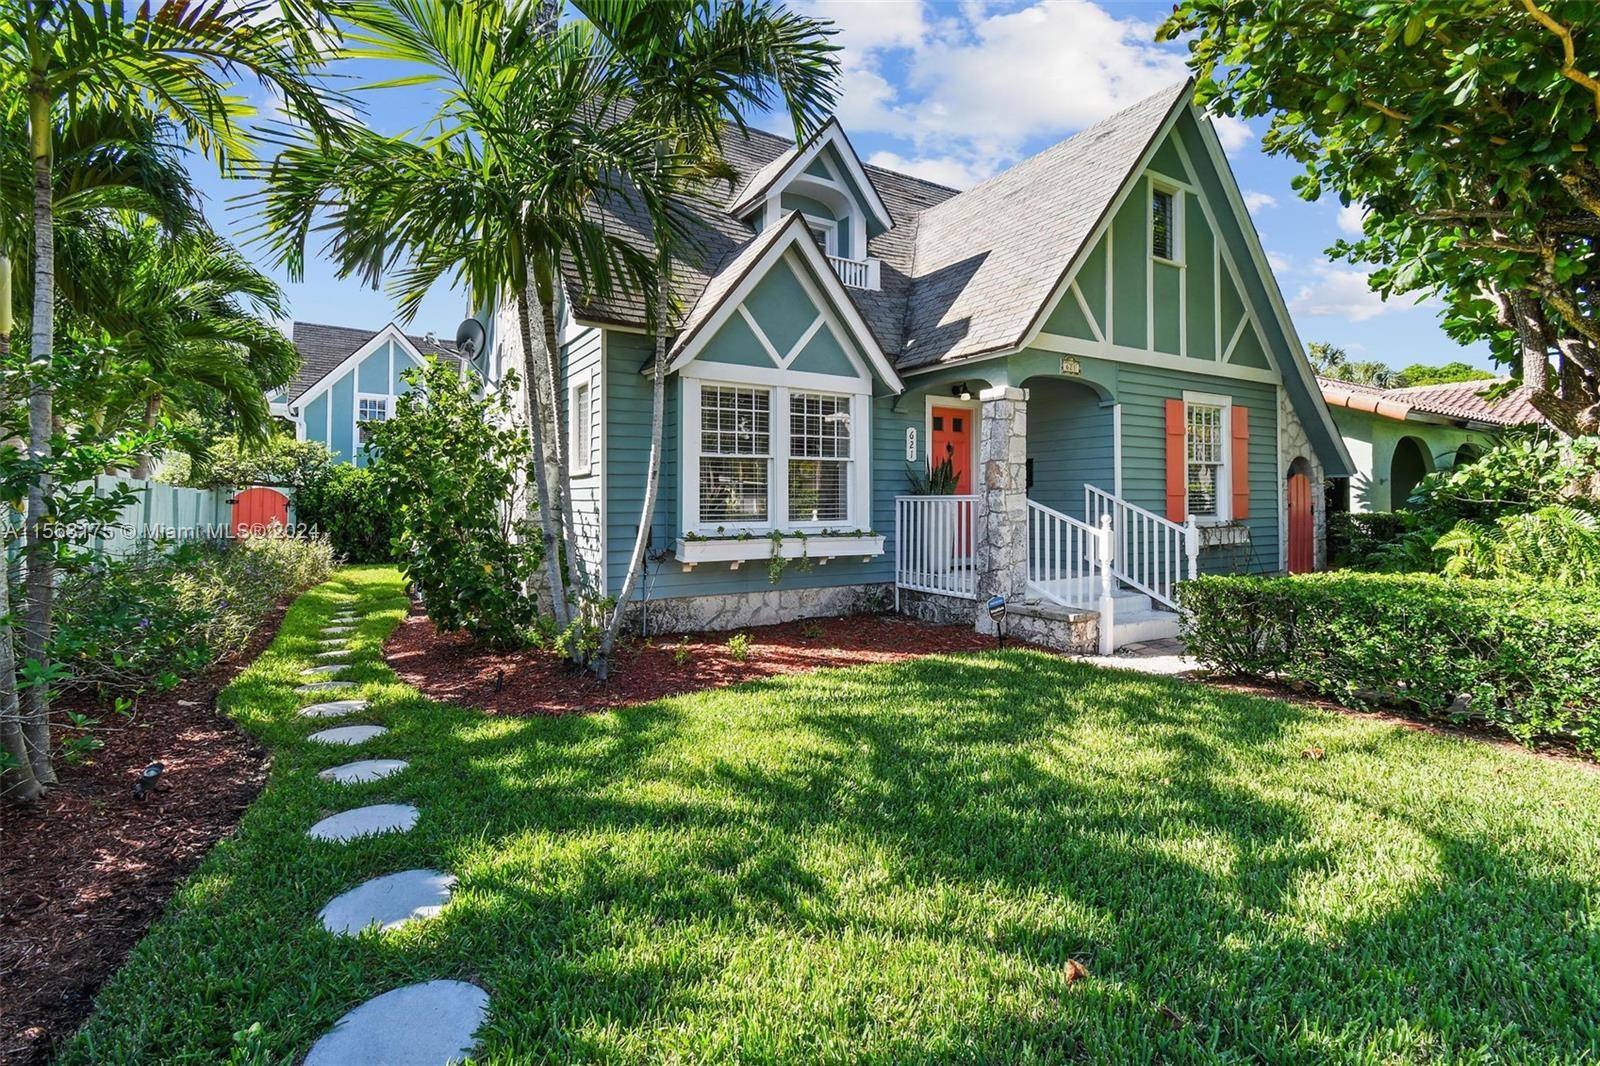 Windsor House Cottage a Historic fully updated 5 bed 4 bath W Room for a pool charming Tudor style Compound nestled in the heart of Parrot Cove s Lake Worth ...